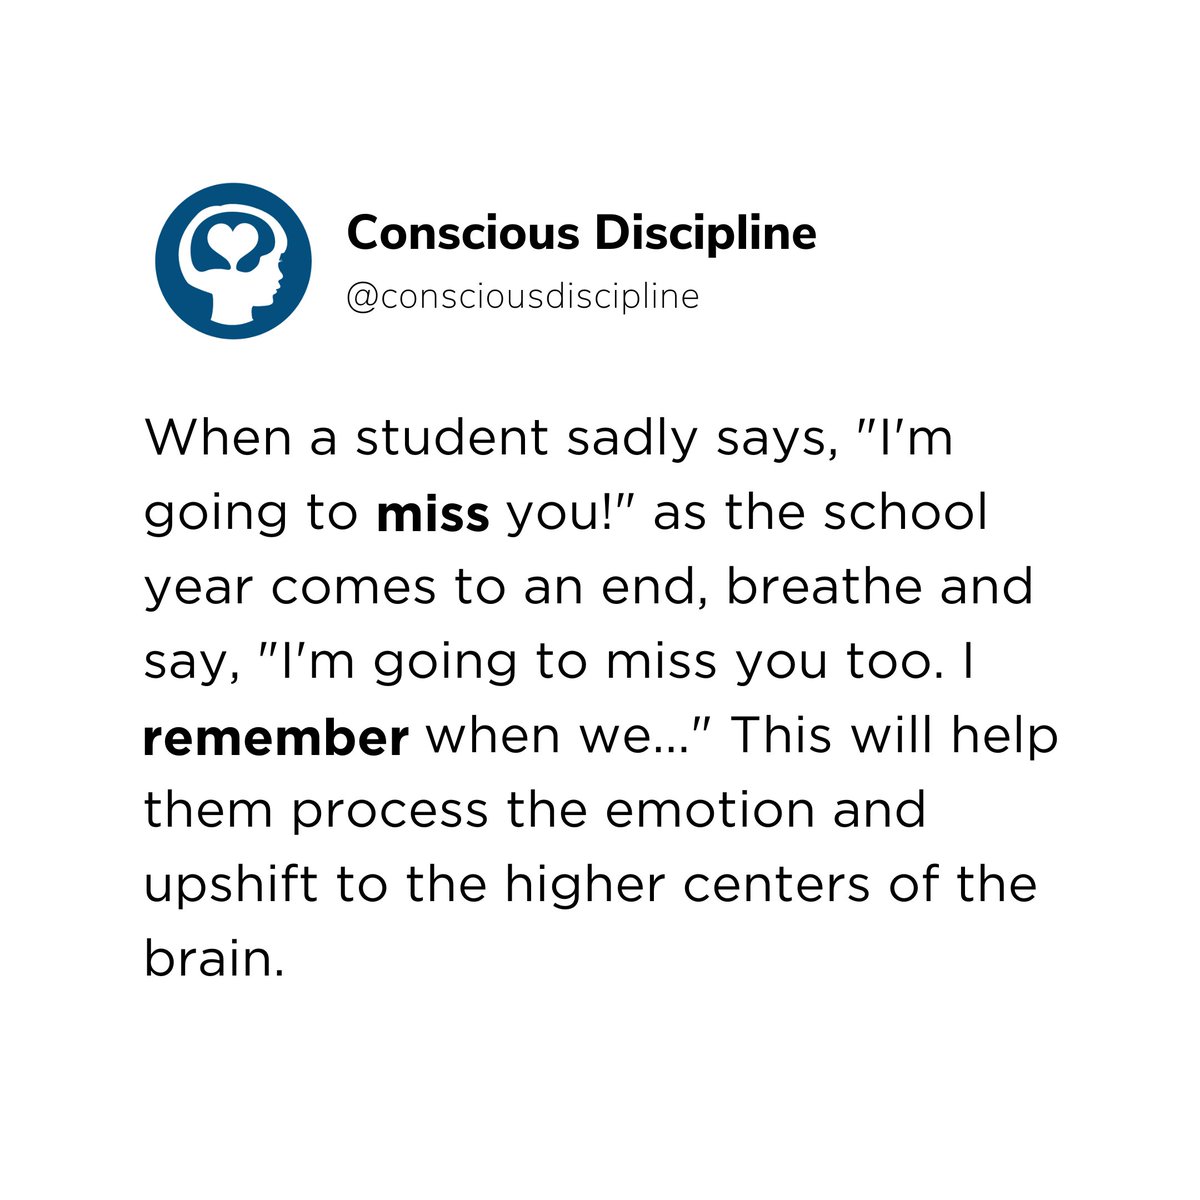 Learn more about how to reframe the emotionally-charged phrase “I’m going to miss…” with the emotionally-grounded phrase “I will remember…” in this podcast episode with Instructor Vicky Helpler: consciousdiscipline.com/e-learning/pod…